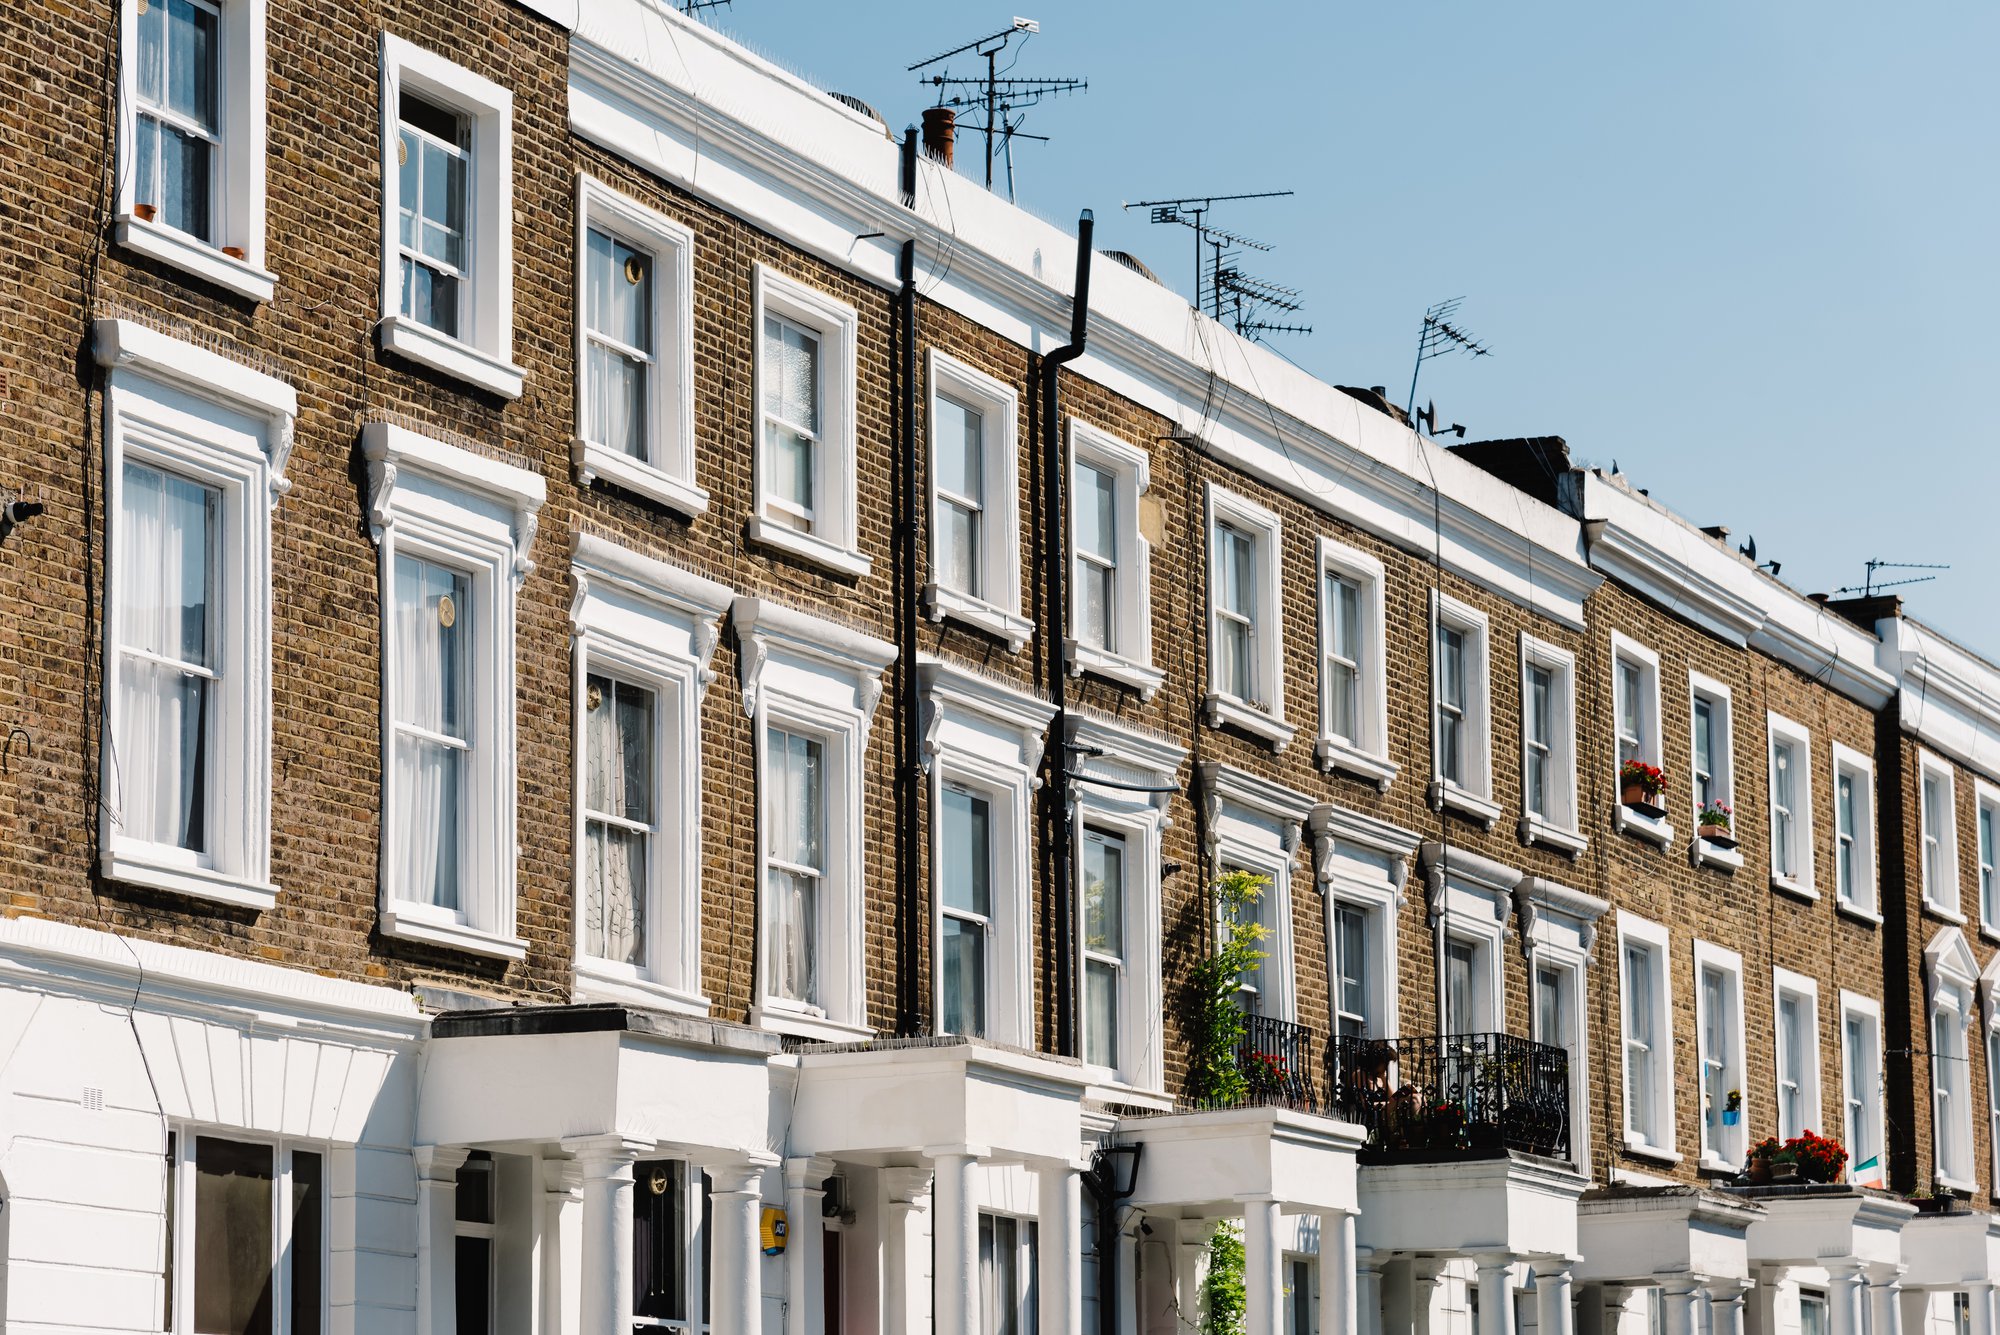 HMO Licence: Everything you need to know